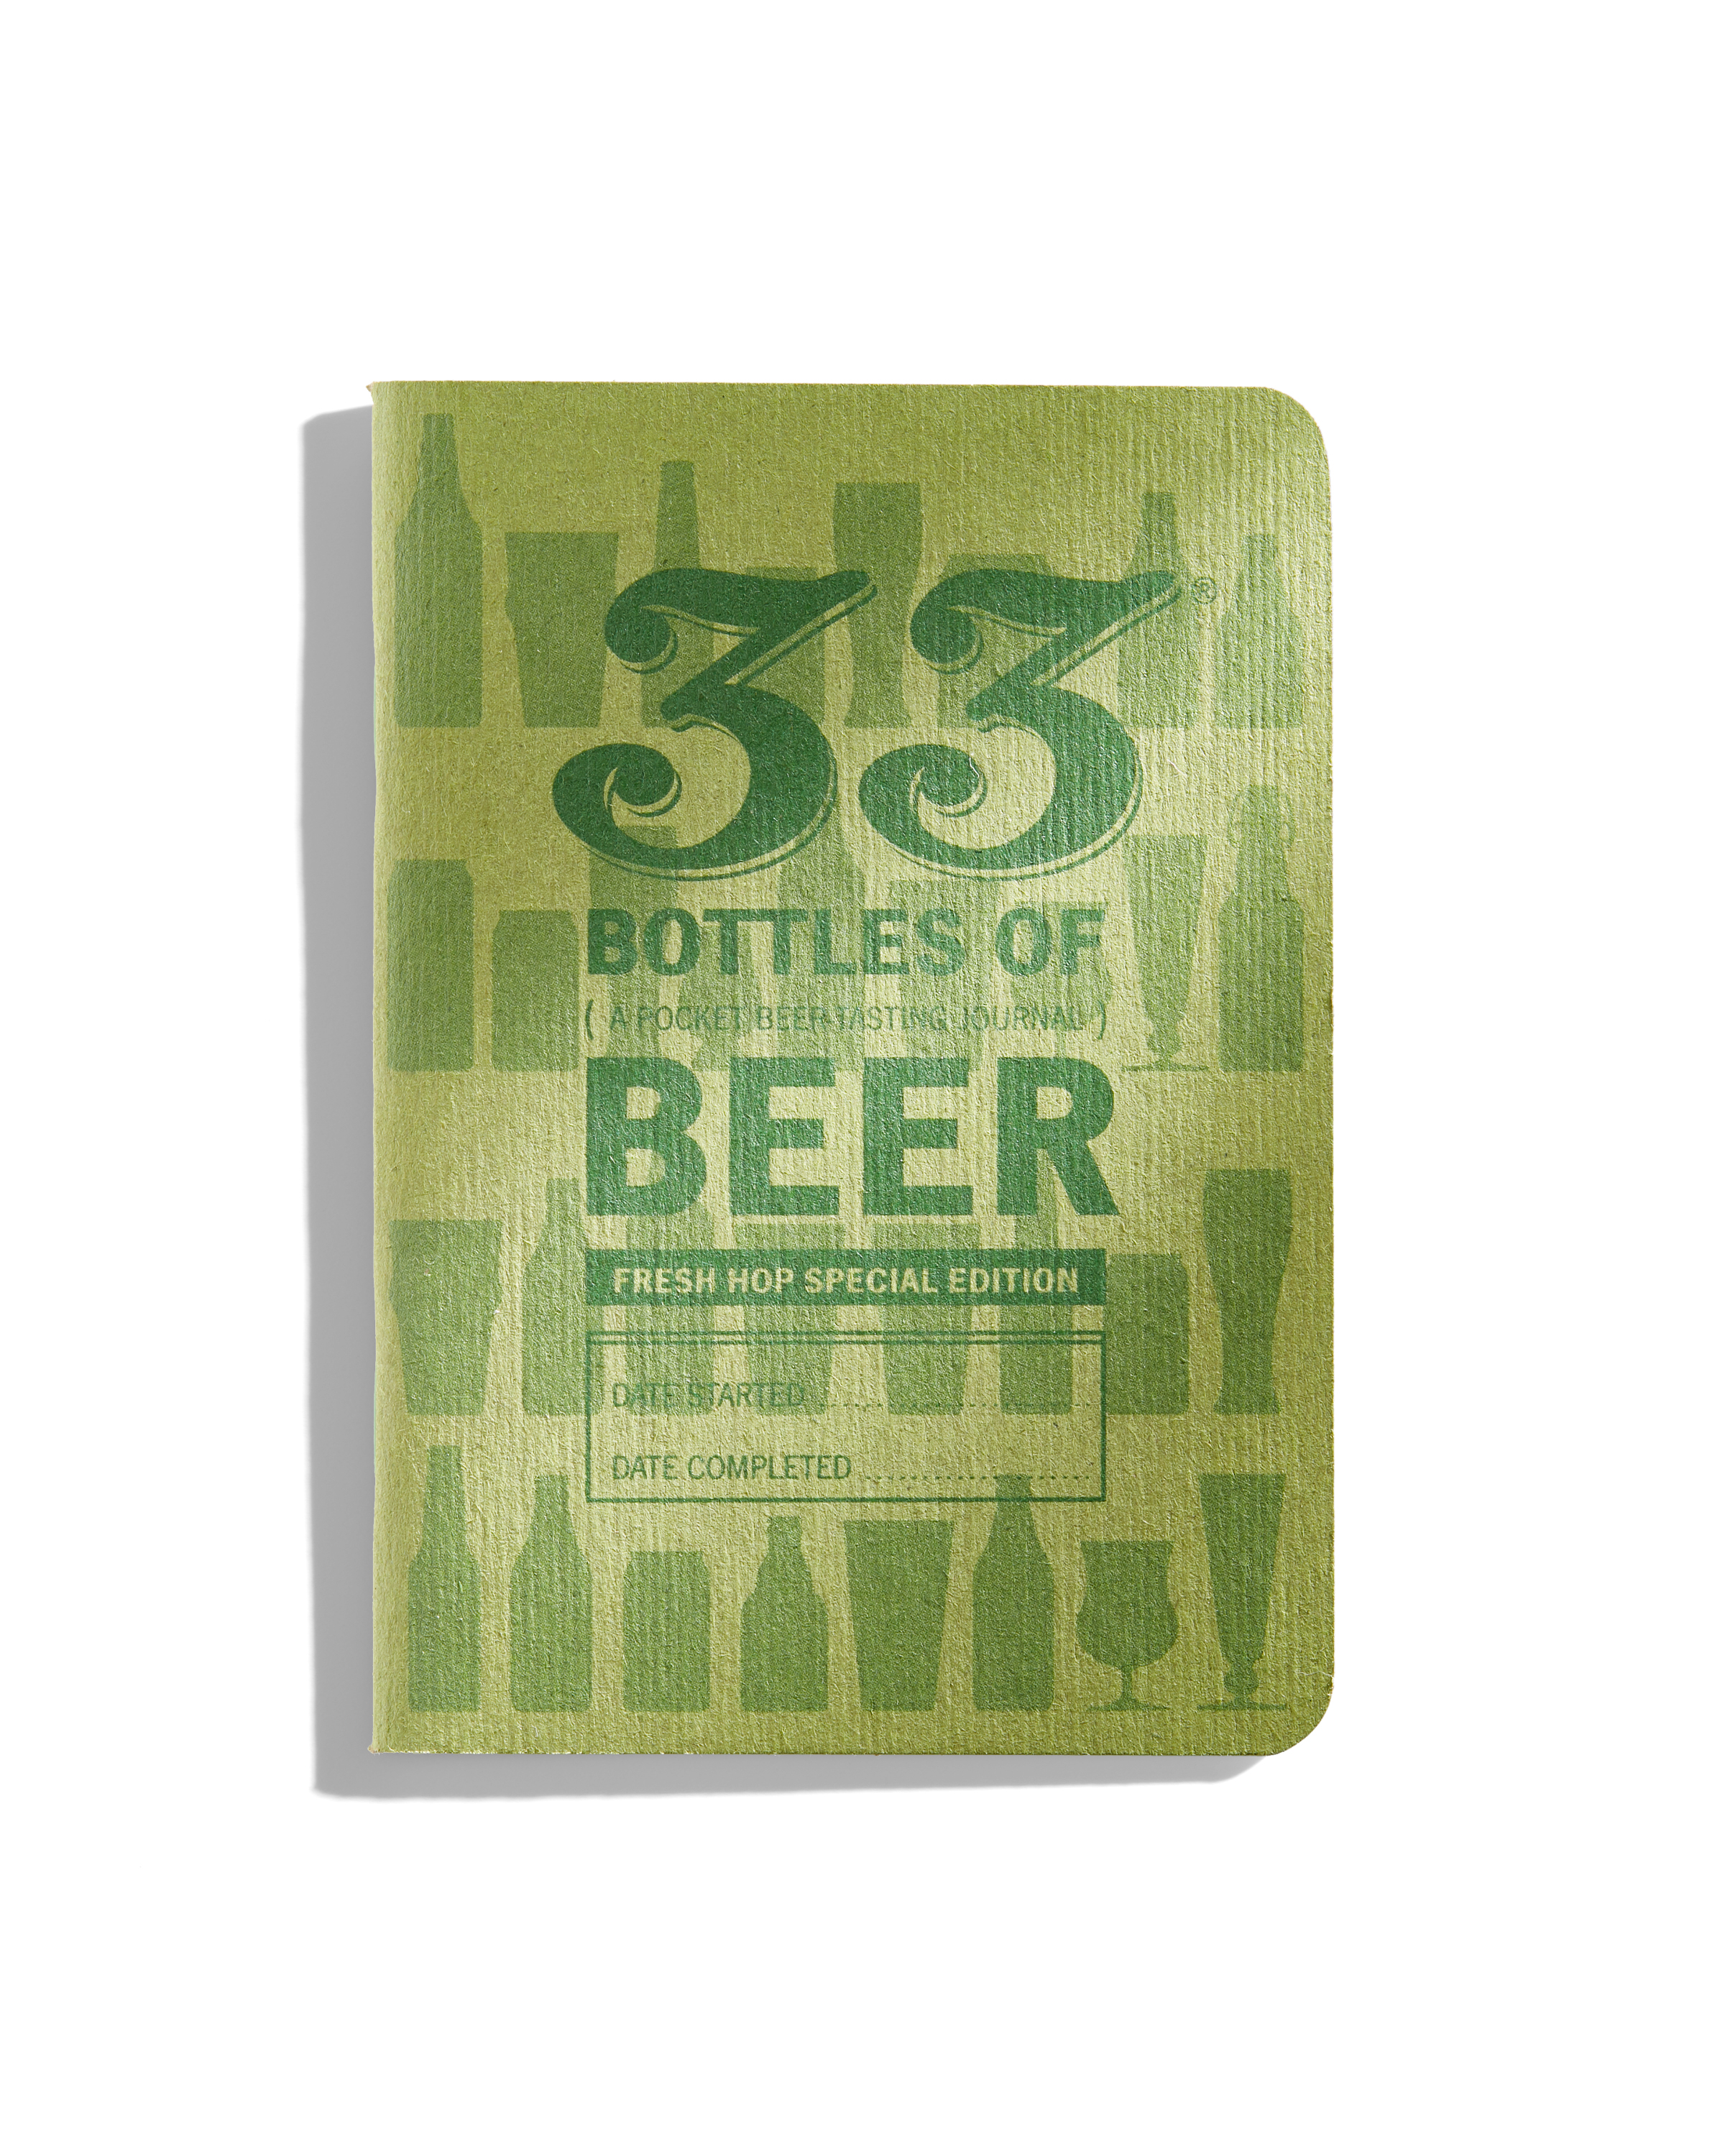 The distinctive cover of the hop-focused pocket beer journal is printed in green ink with green staples binding the pages together. (image courtesy of 33 Books)